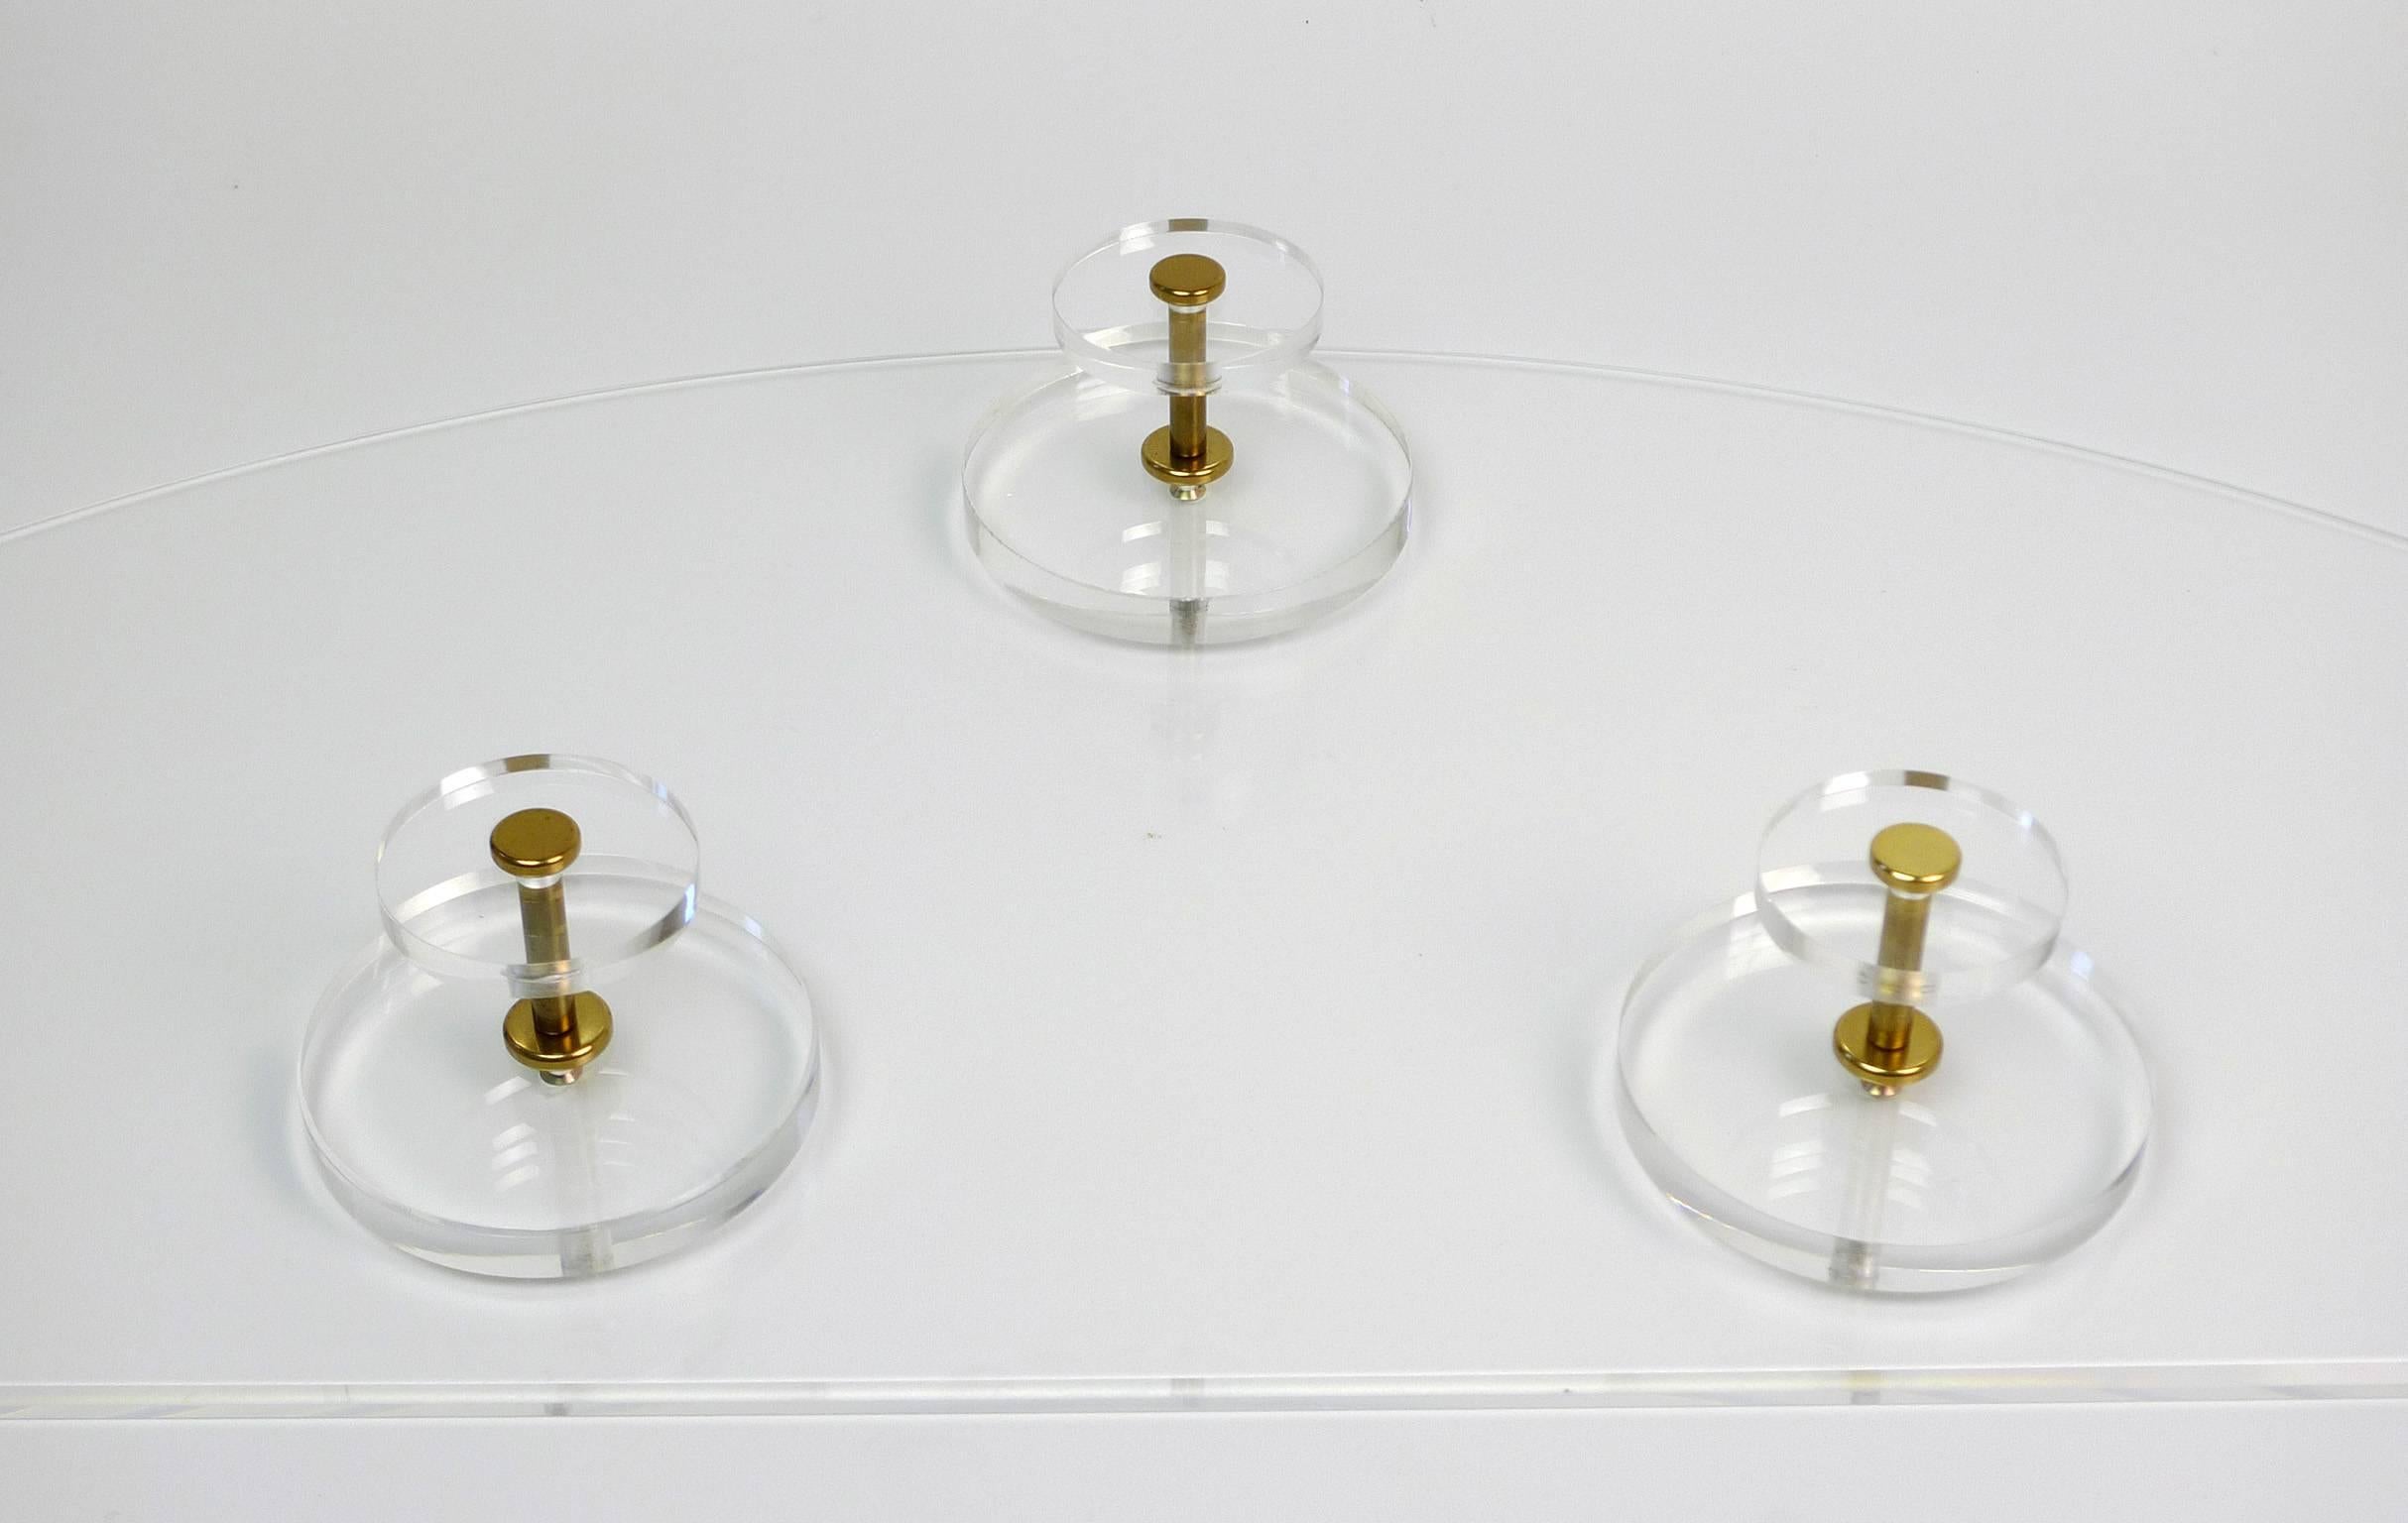 Coatrack Made of Plexiglass with Brass Hooks, Germany, 1970s For Sale 1